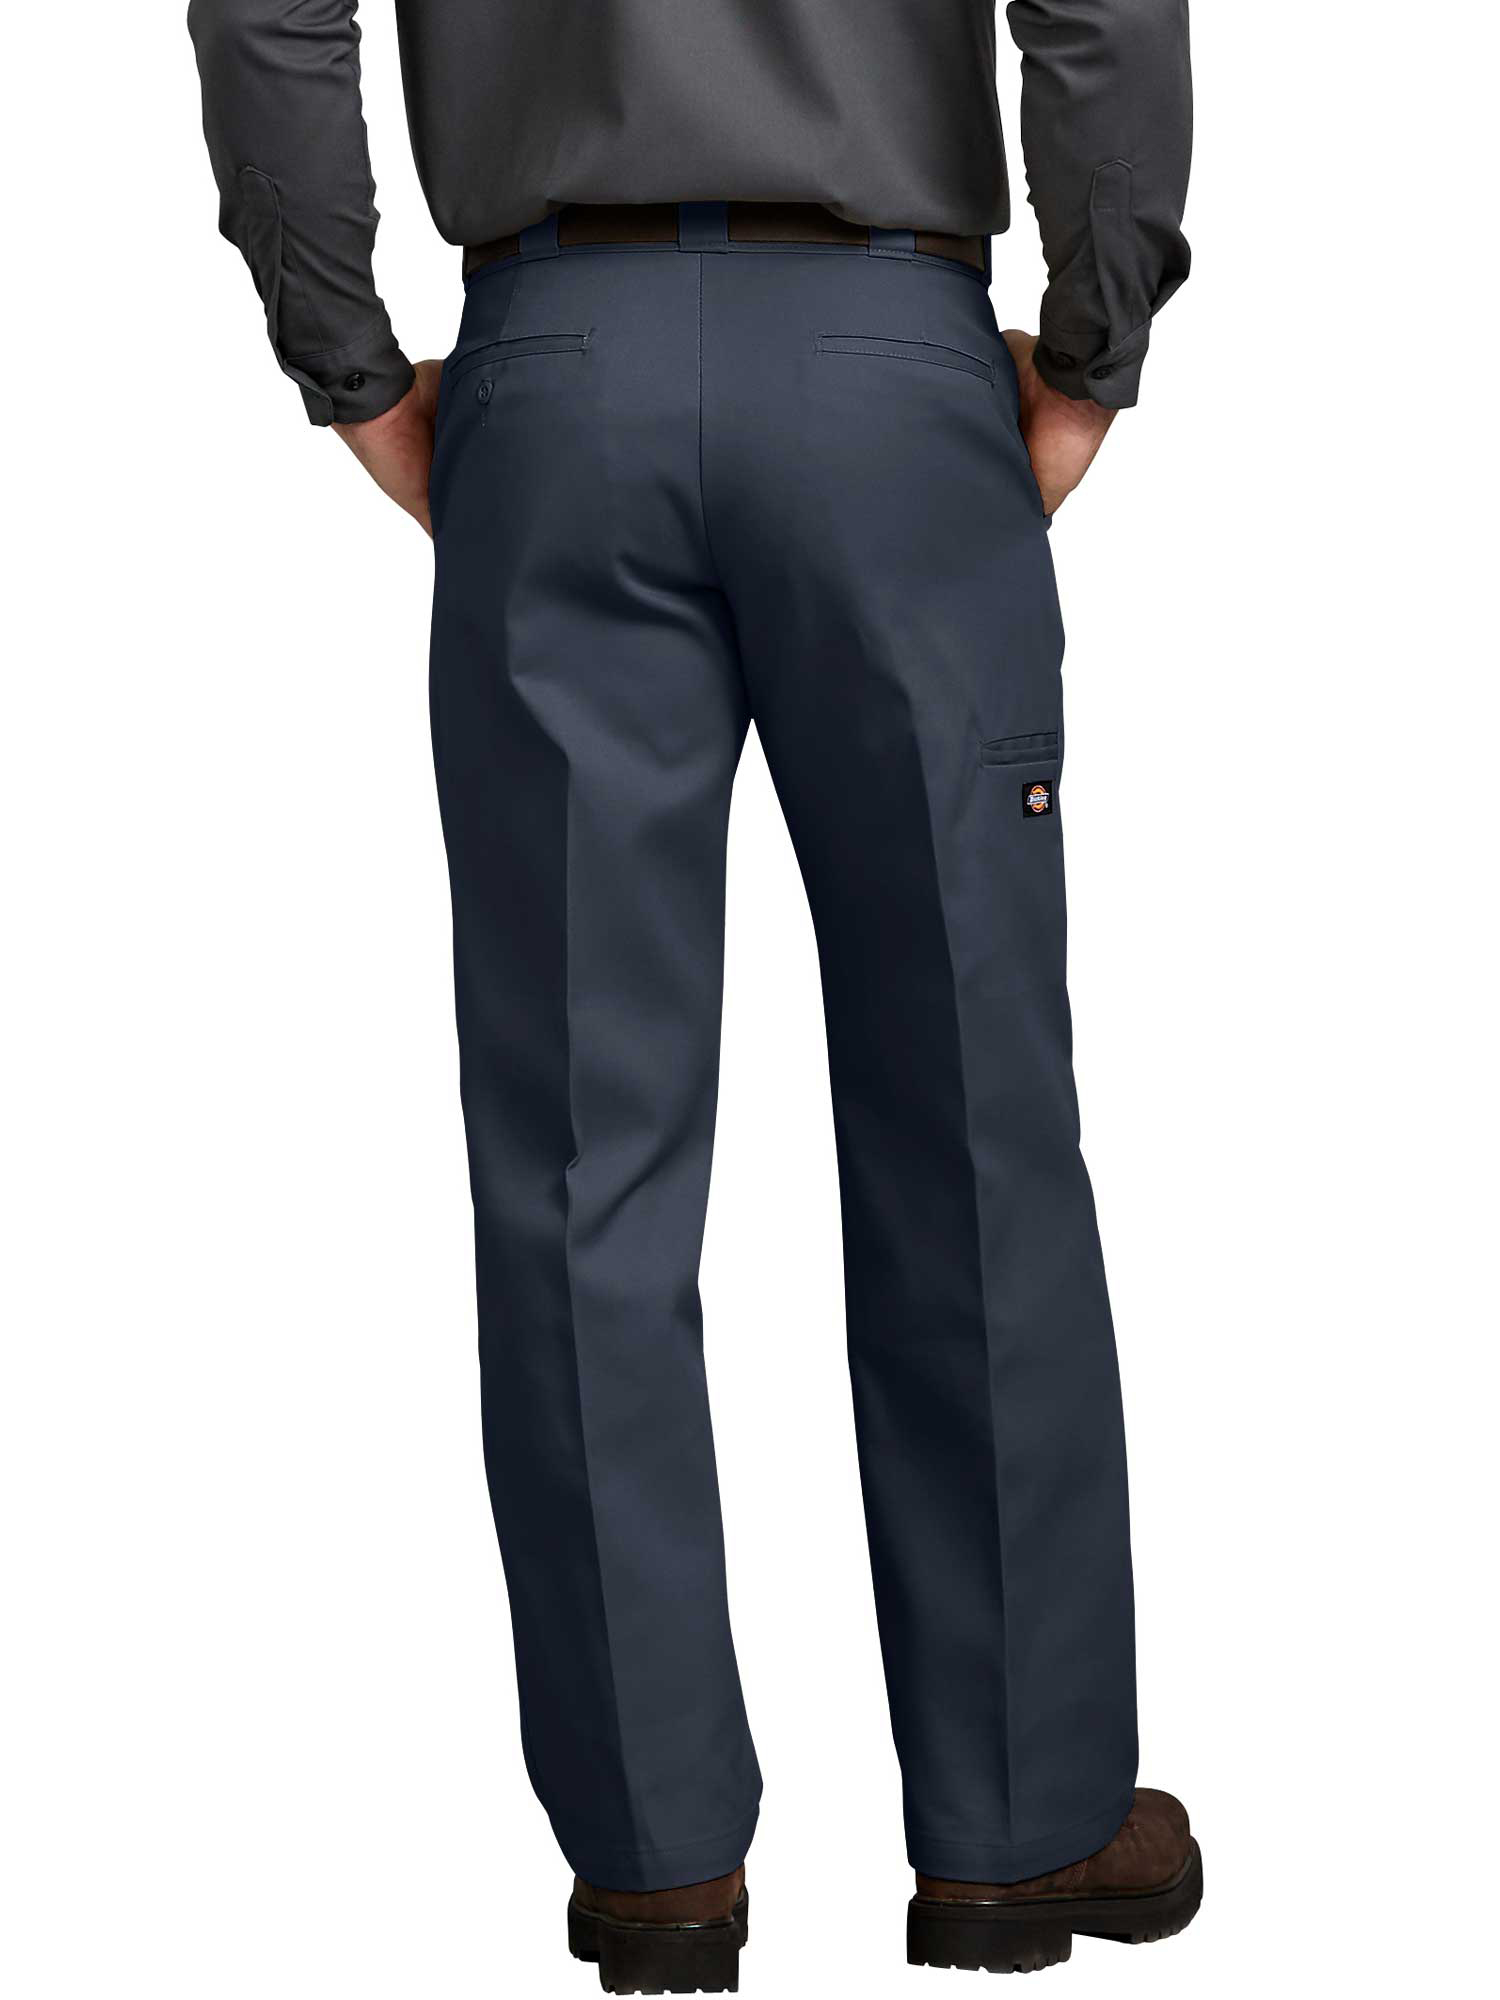 Dickies Mens Relaxed Fit Straight Leg Double Knee Pants - image 2 of 2